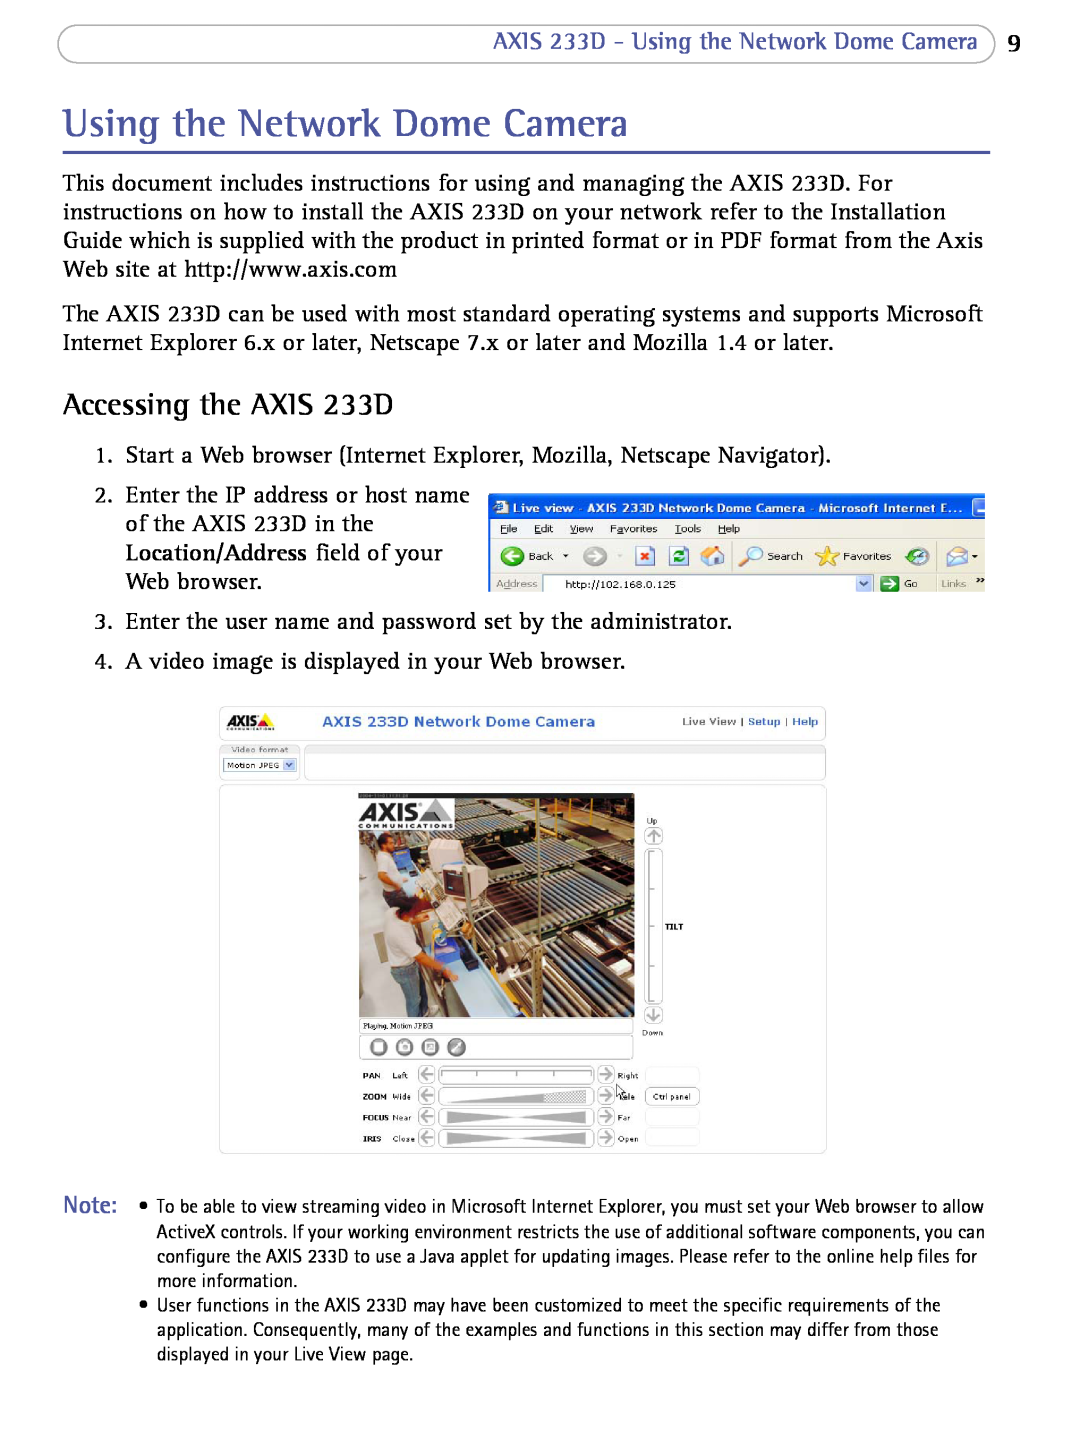 Axis Communications user manual Accessing the AXIS 233D, AXIS 233D - Using the Network Dome Camera 